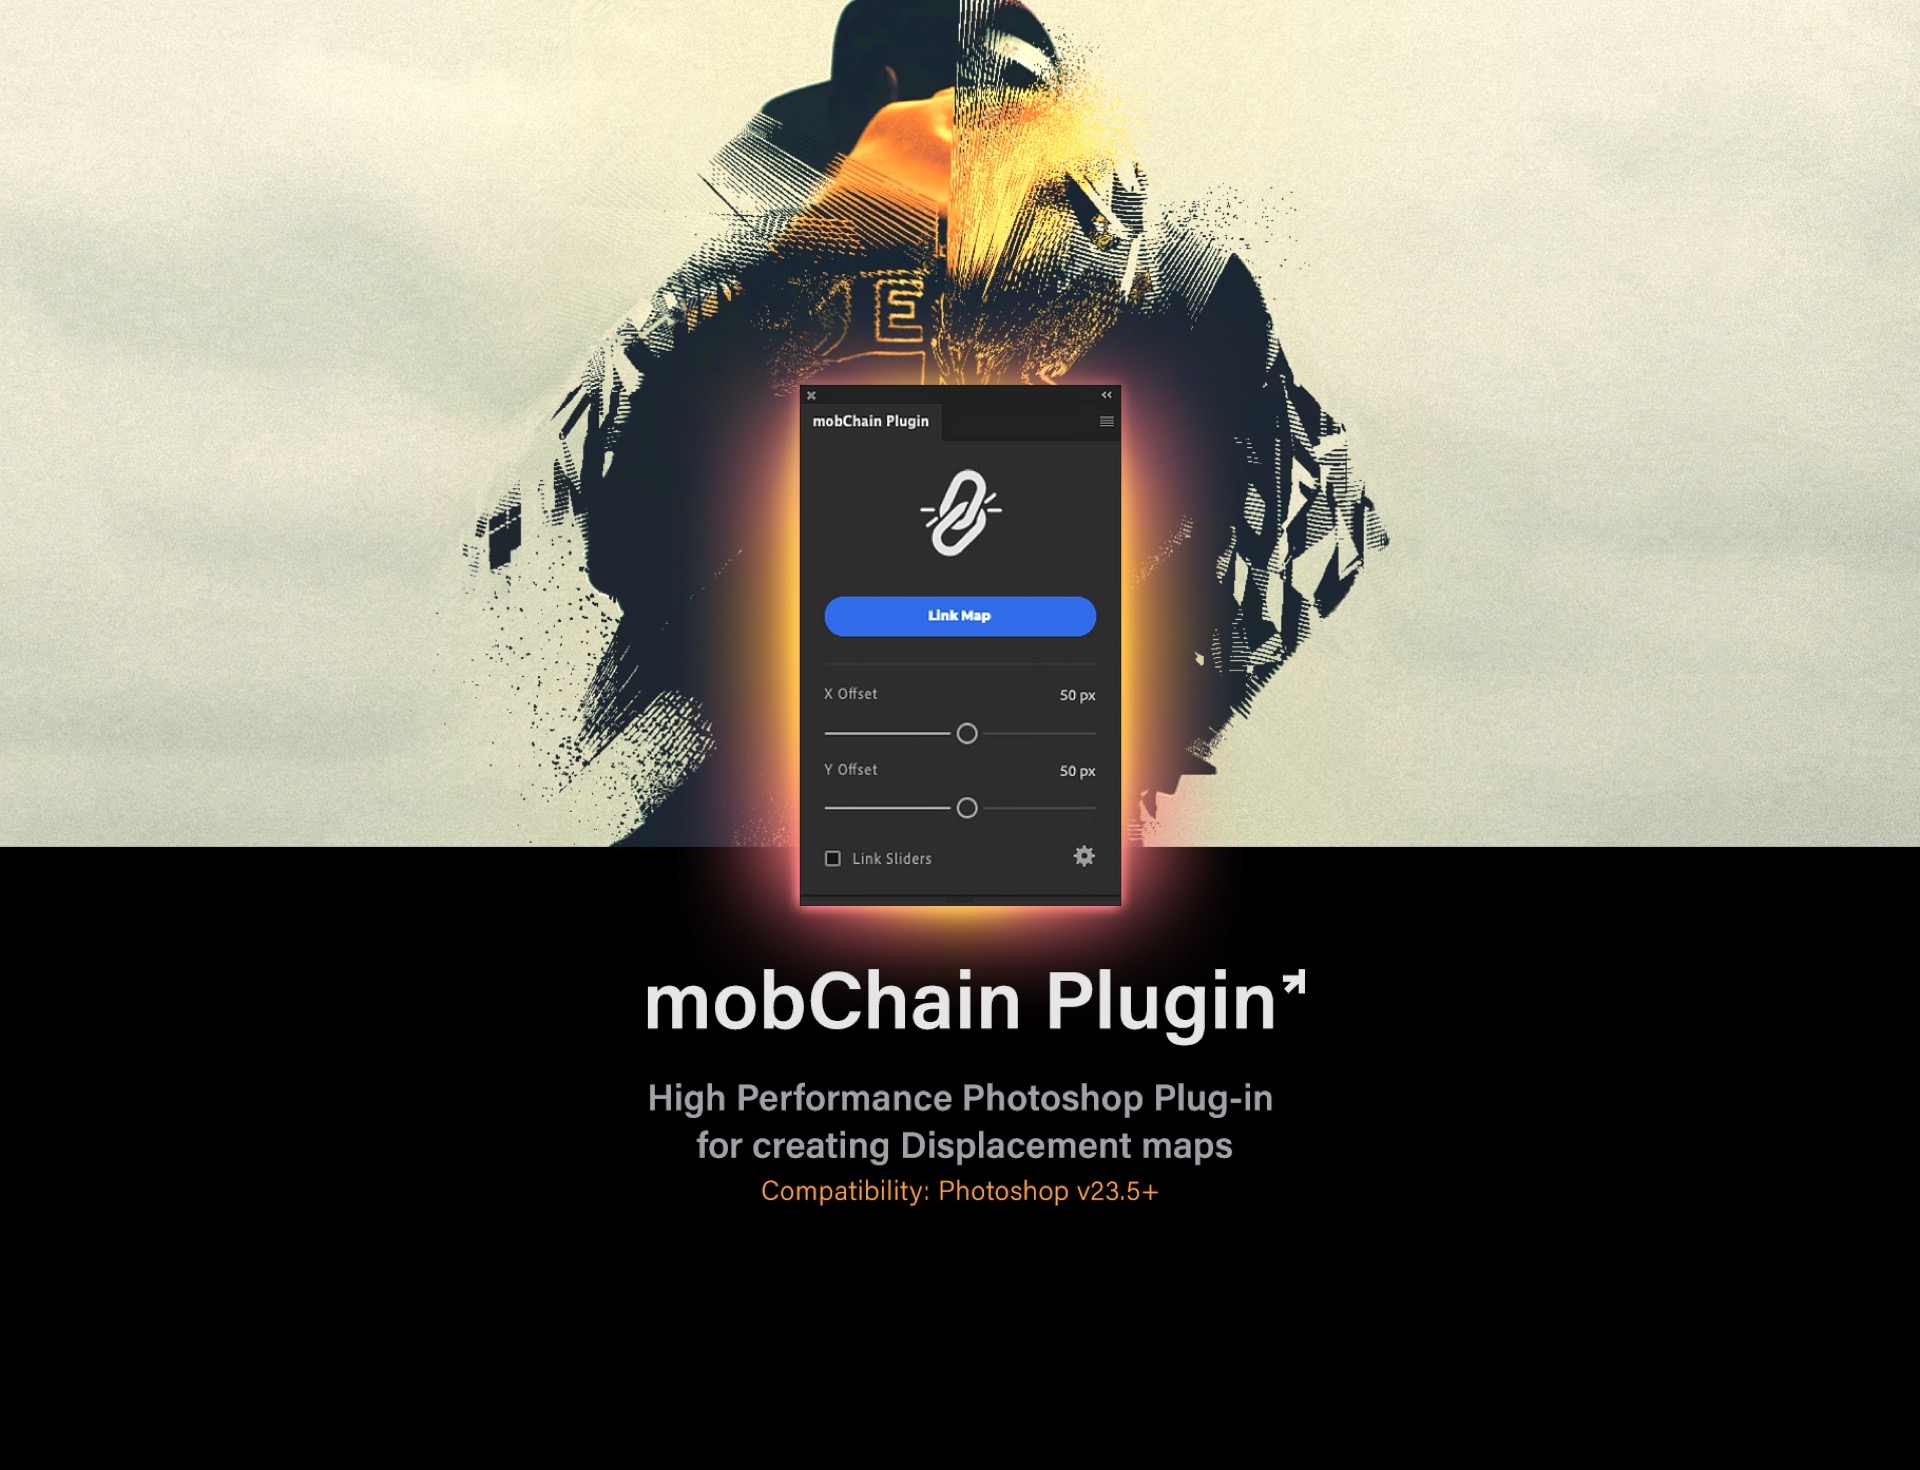 mobChain Plugin. High-performance Photoshop Plug-in for creating displacement maps.